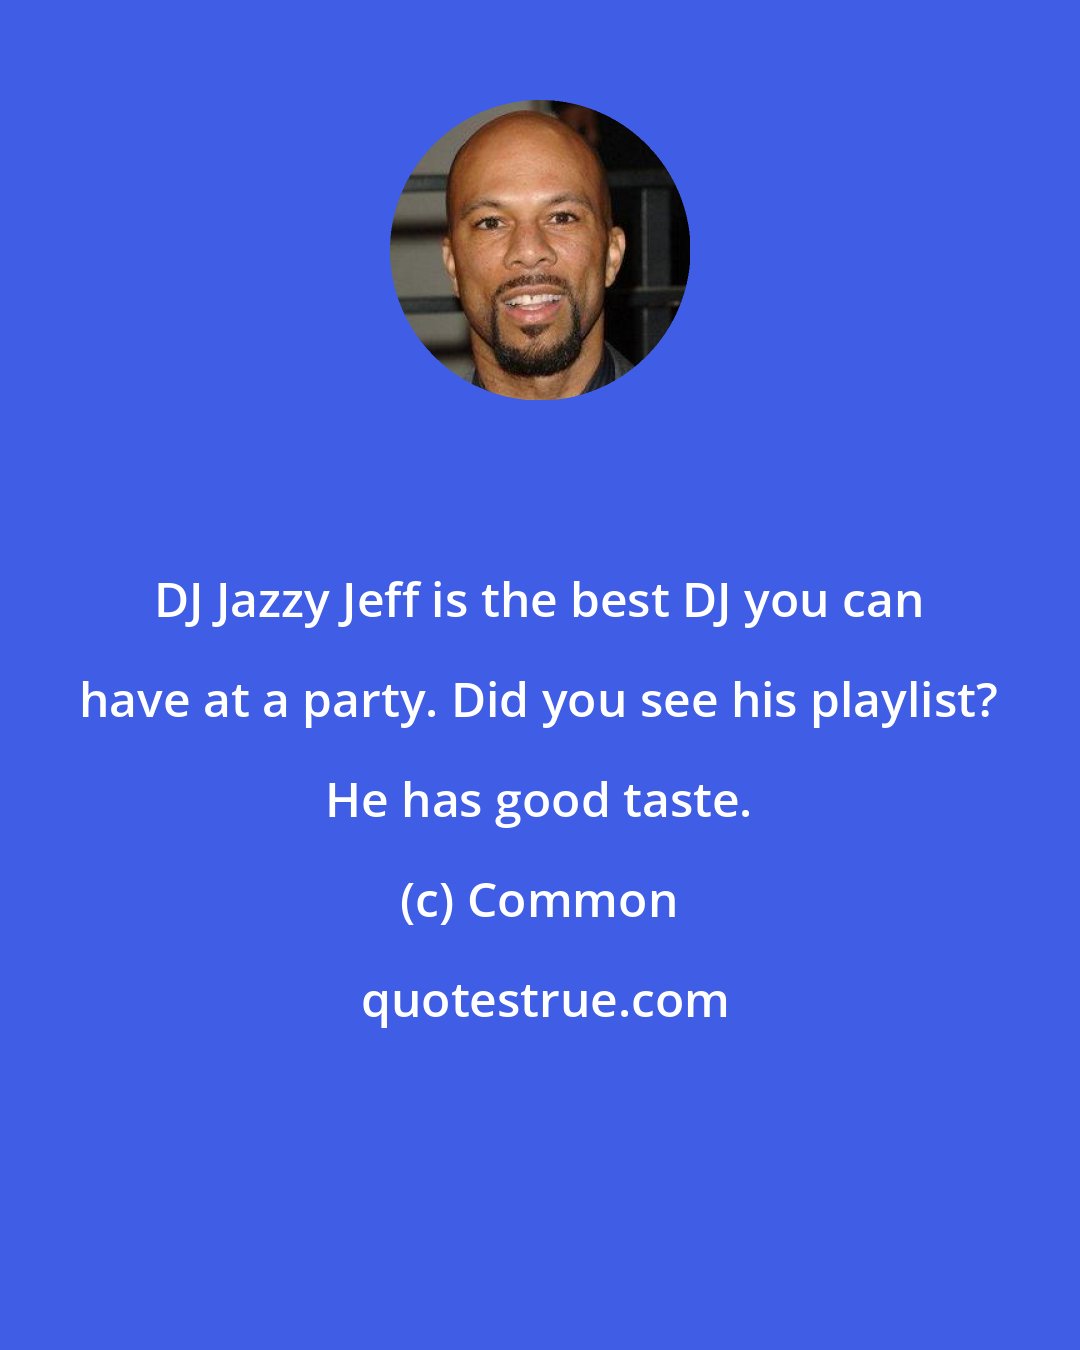 Common: DJ Jazzy Jeff is the best DJ you can have at a party. Did you see his playlist? He has good taste.